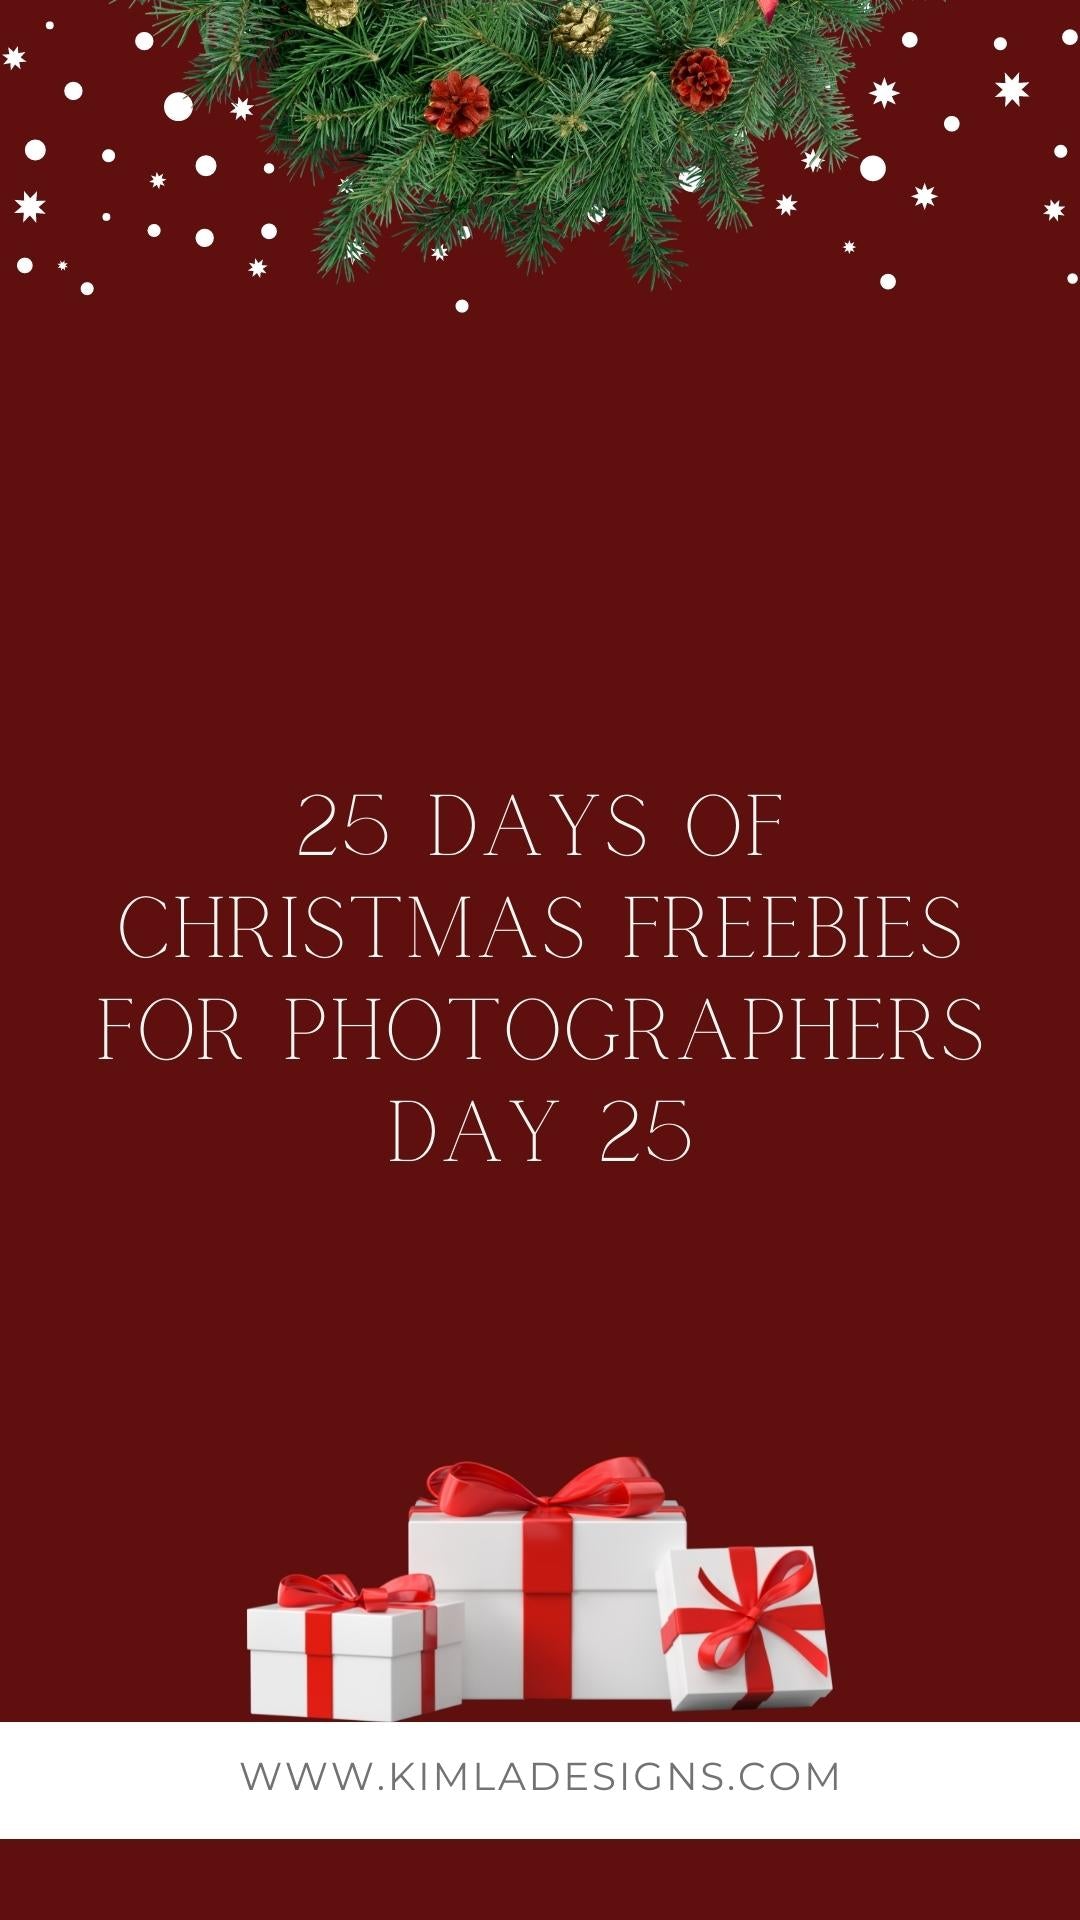 25 Days of Christmas Freebies Day 25th